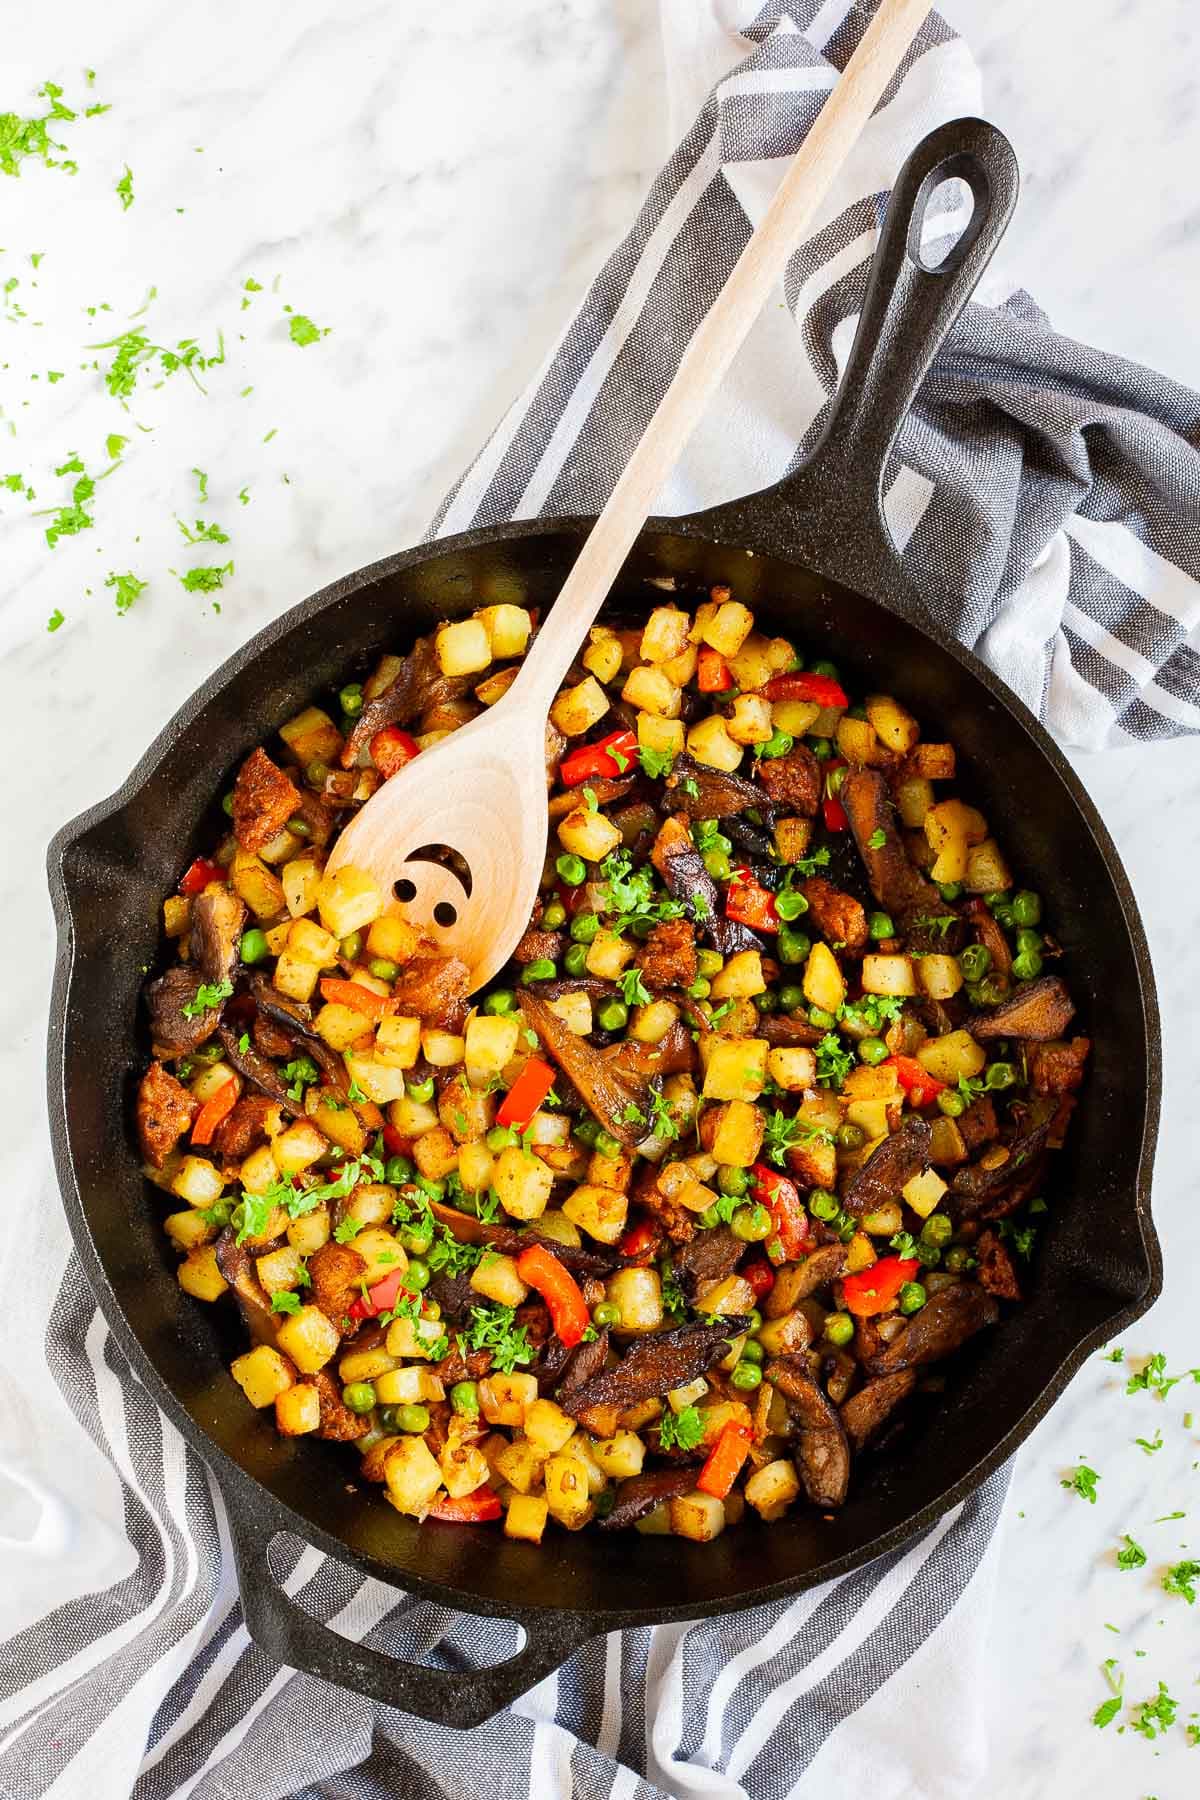 Black cast iron skillet from above with a wooden spatula and colorful chopped veggies like red bell pepper, yellow potatoes, brown mushroom, green peas, fresh parsley